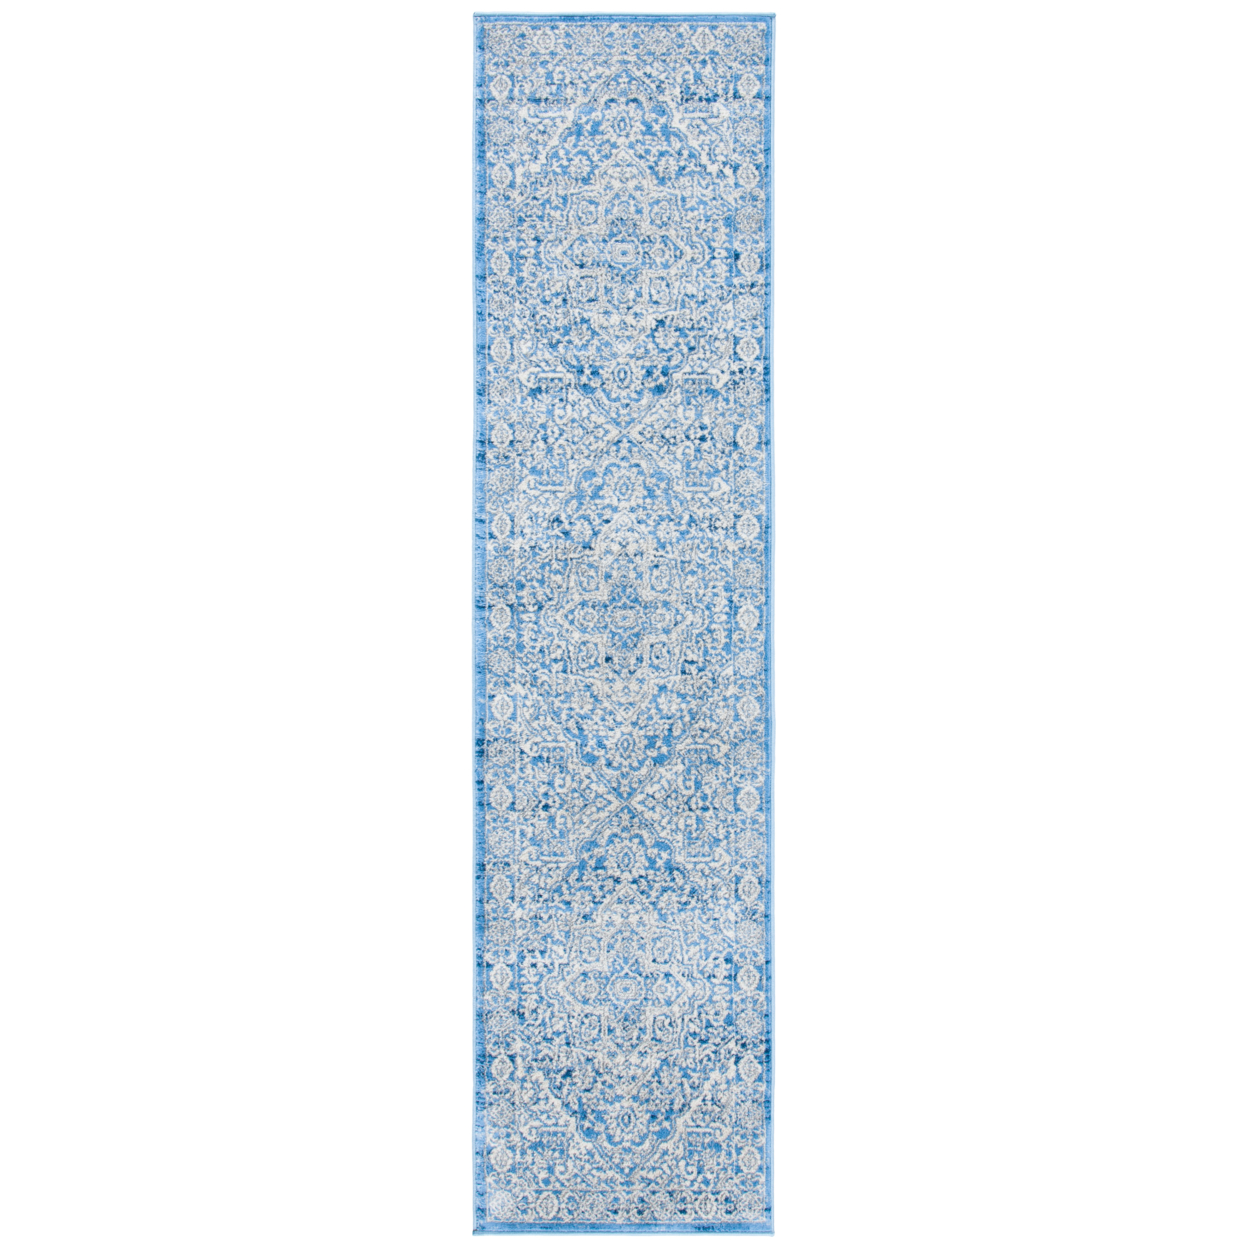 SAFAVIEH BNT832A Brentwood Ivory / Navy - 2 X 4